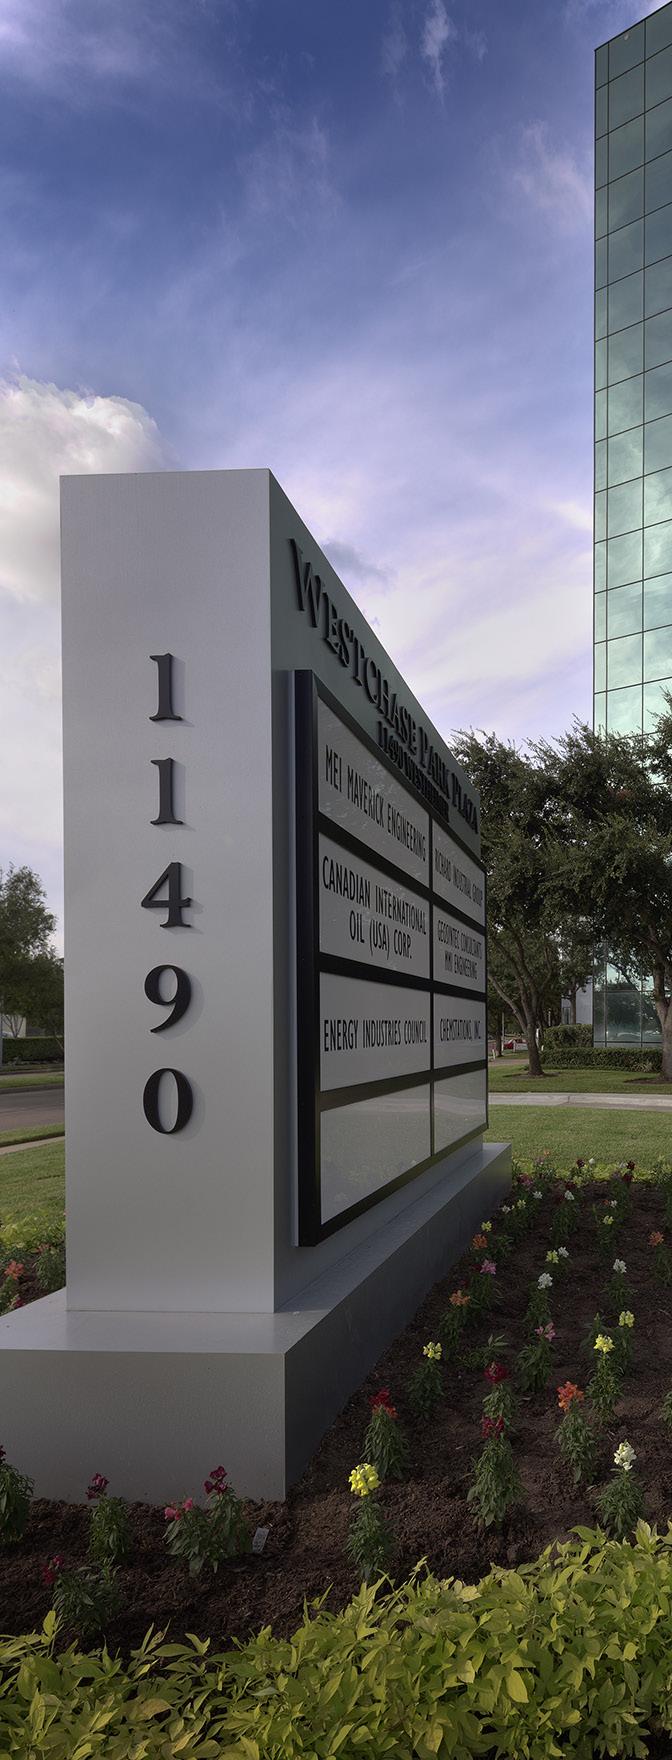 Westchase Park Plaza, or 11490 Westheimer, is a 231,000 square foot Class A office building located in the heart of Houston s rapidly expanding Westchase